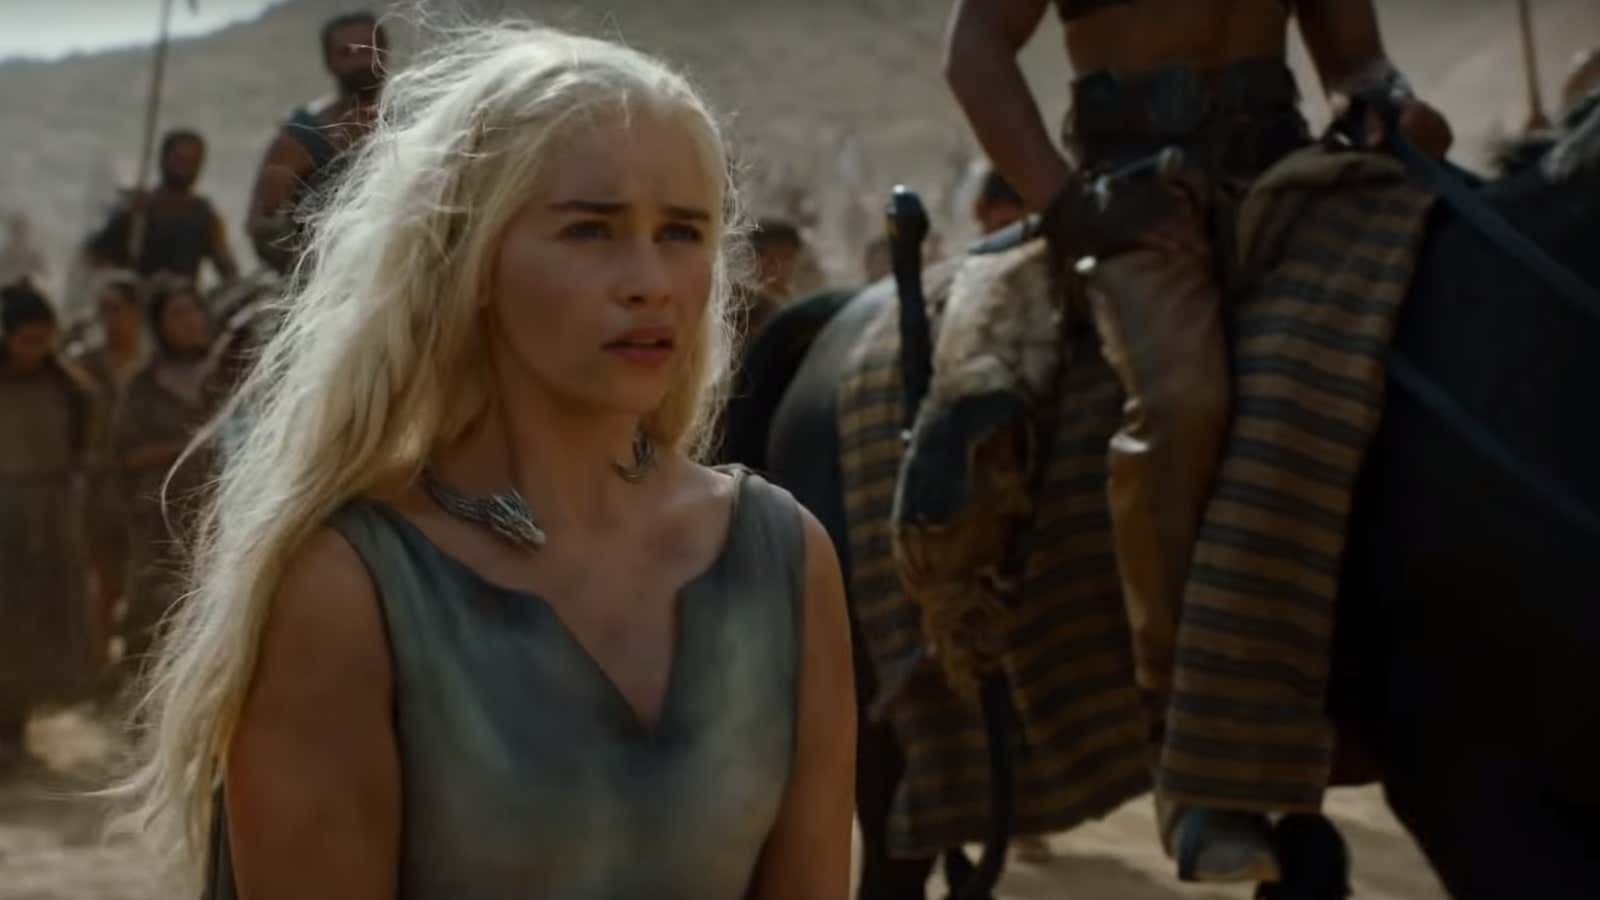 “Game of Thrones” is not designed for “casual engagement.”